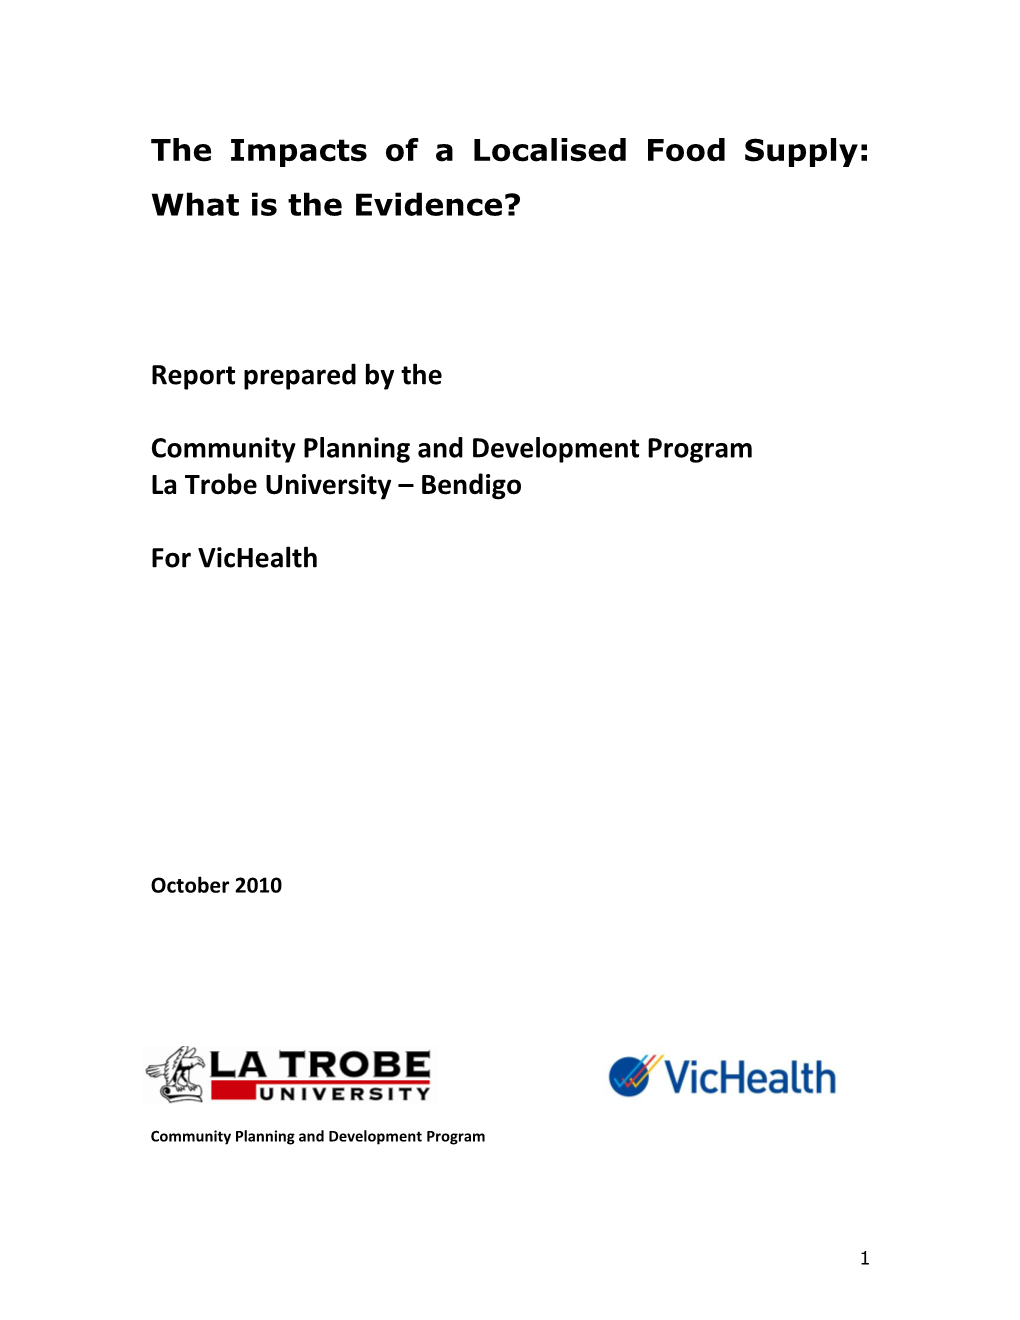 The Impacts of a Localised Food Supply: What Is the Evidence?